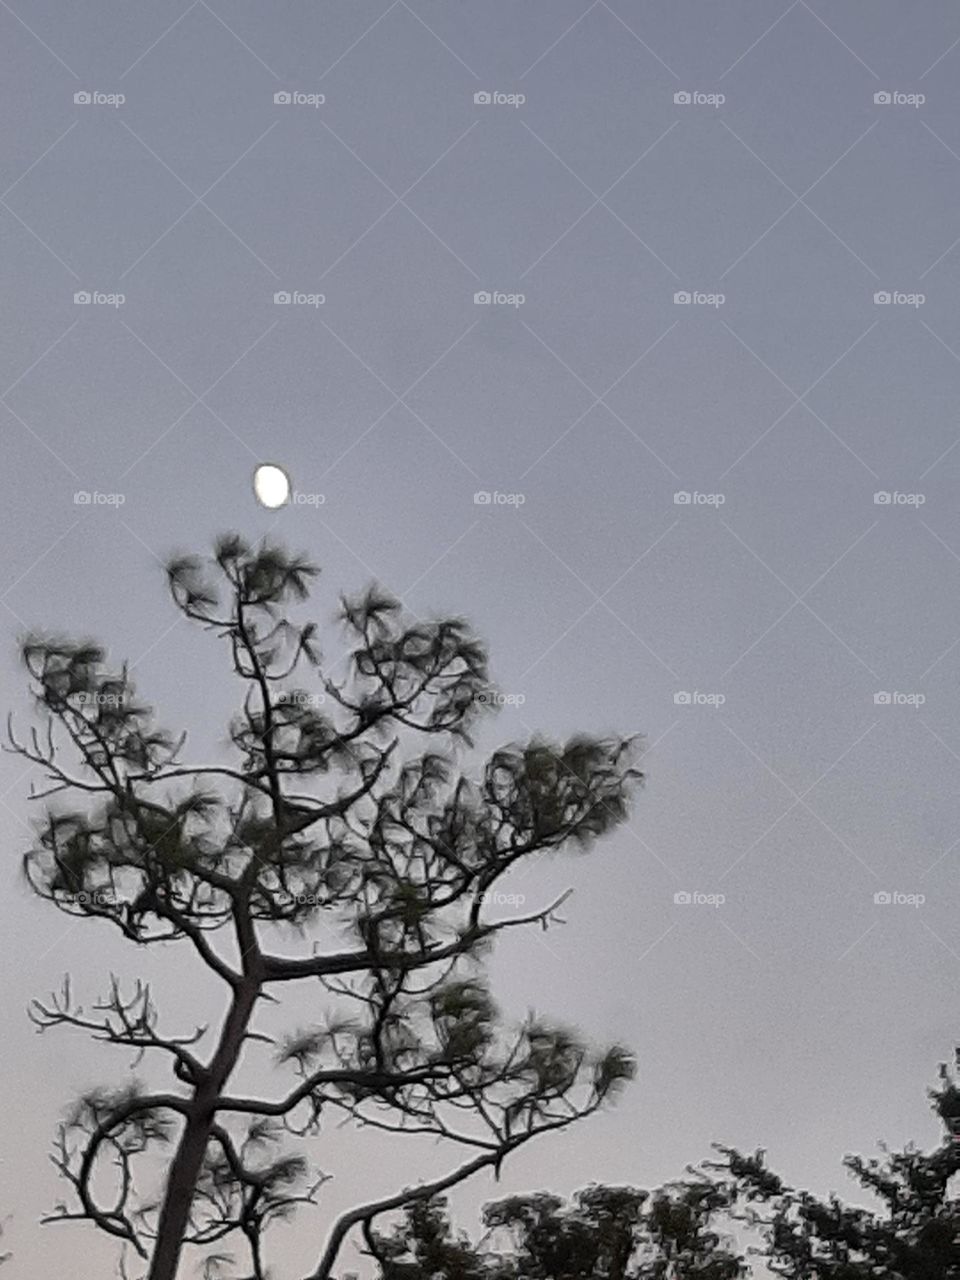 Pine tree branches dancing for the moon.